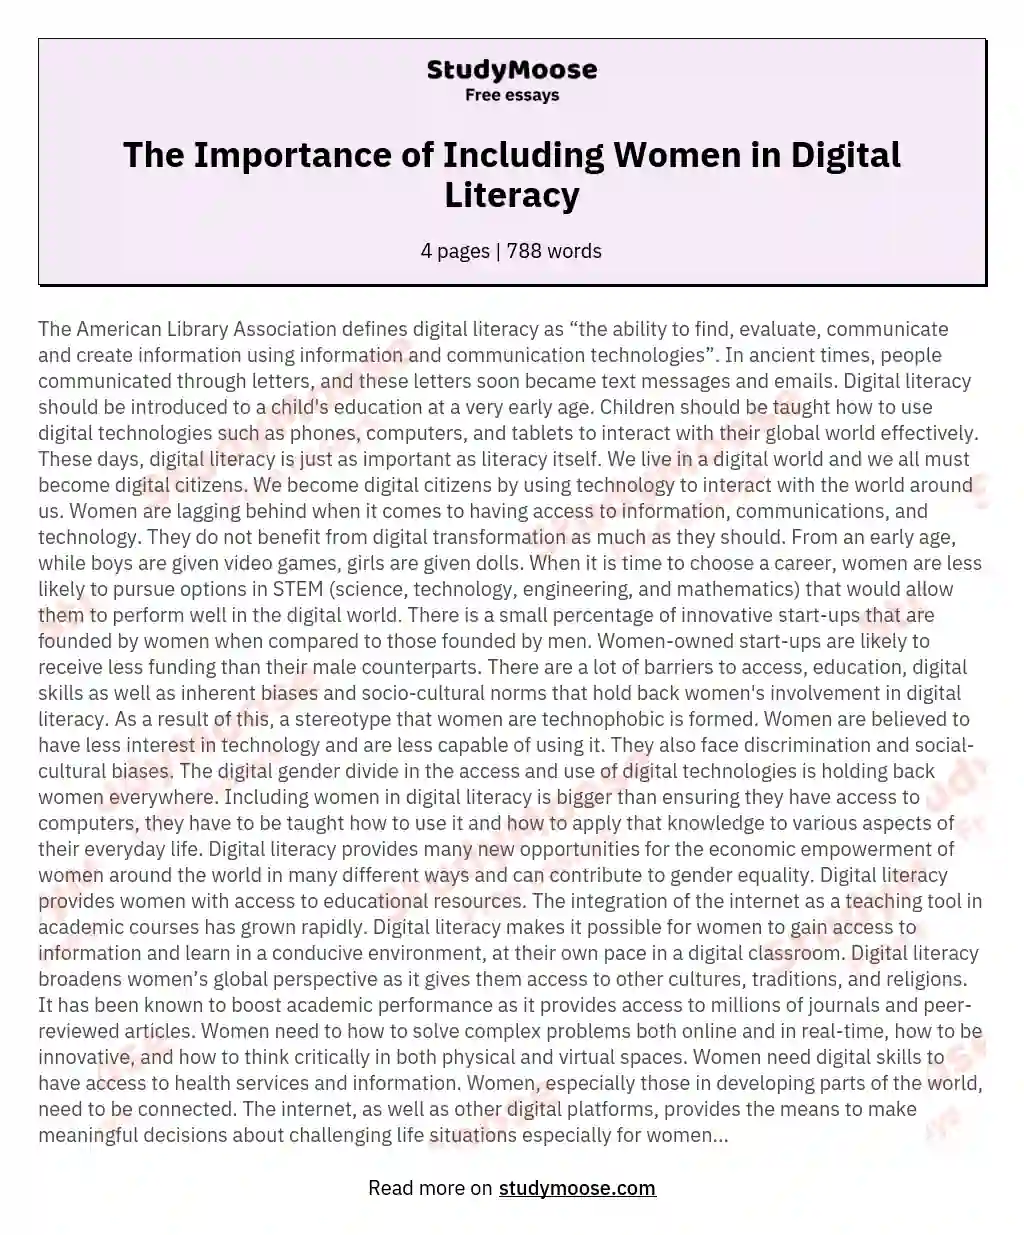 The Importance of Including Women in Digital Literacy essay